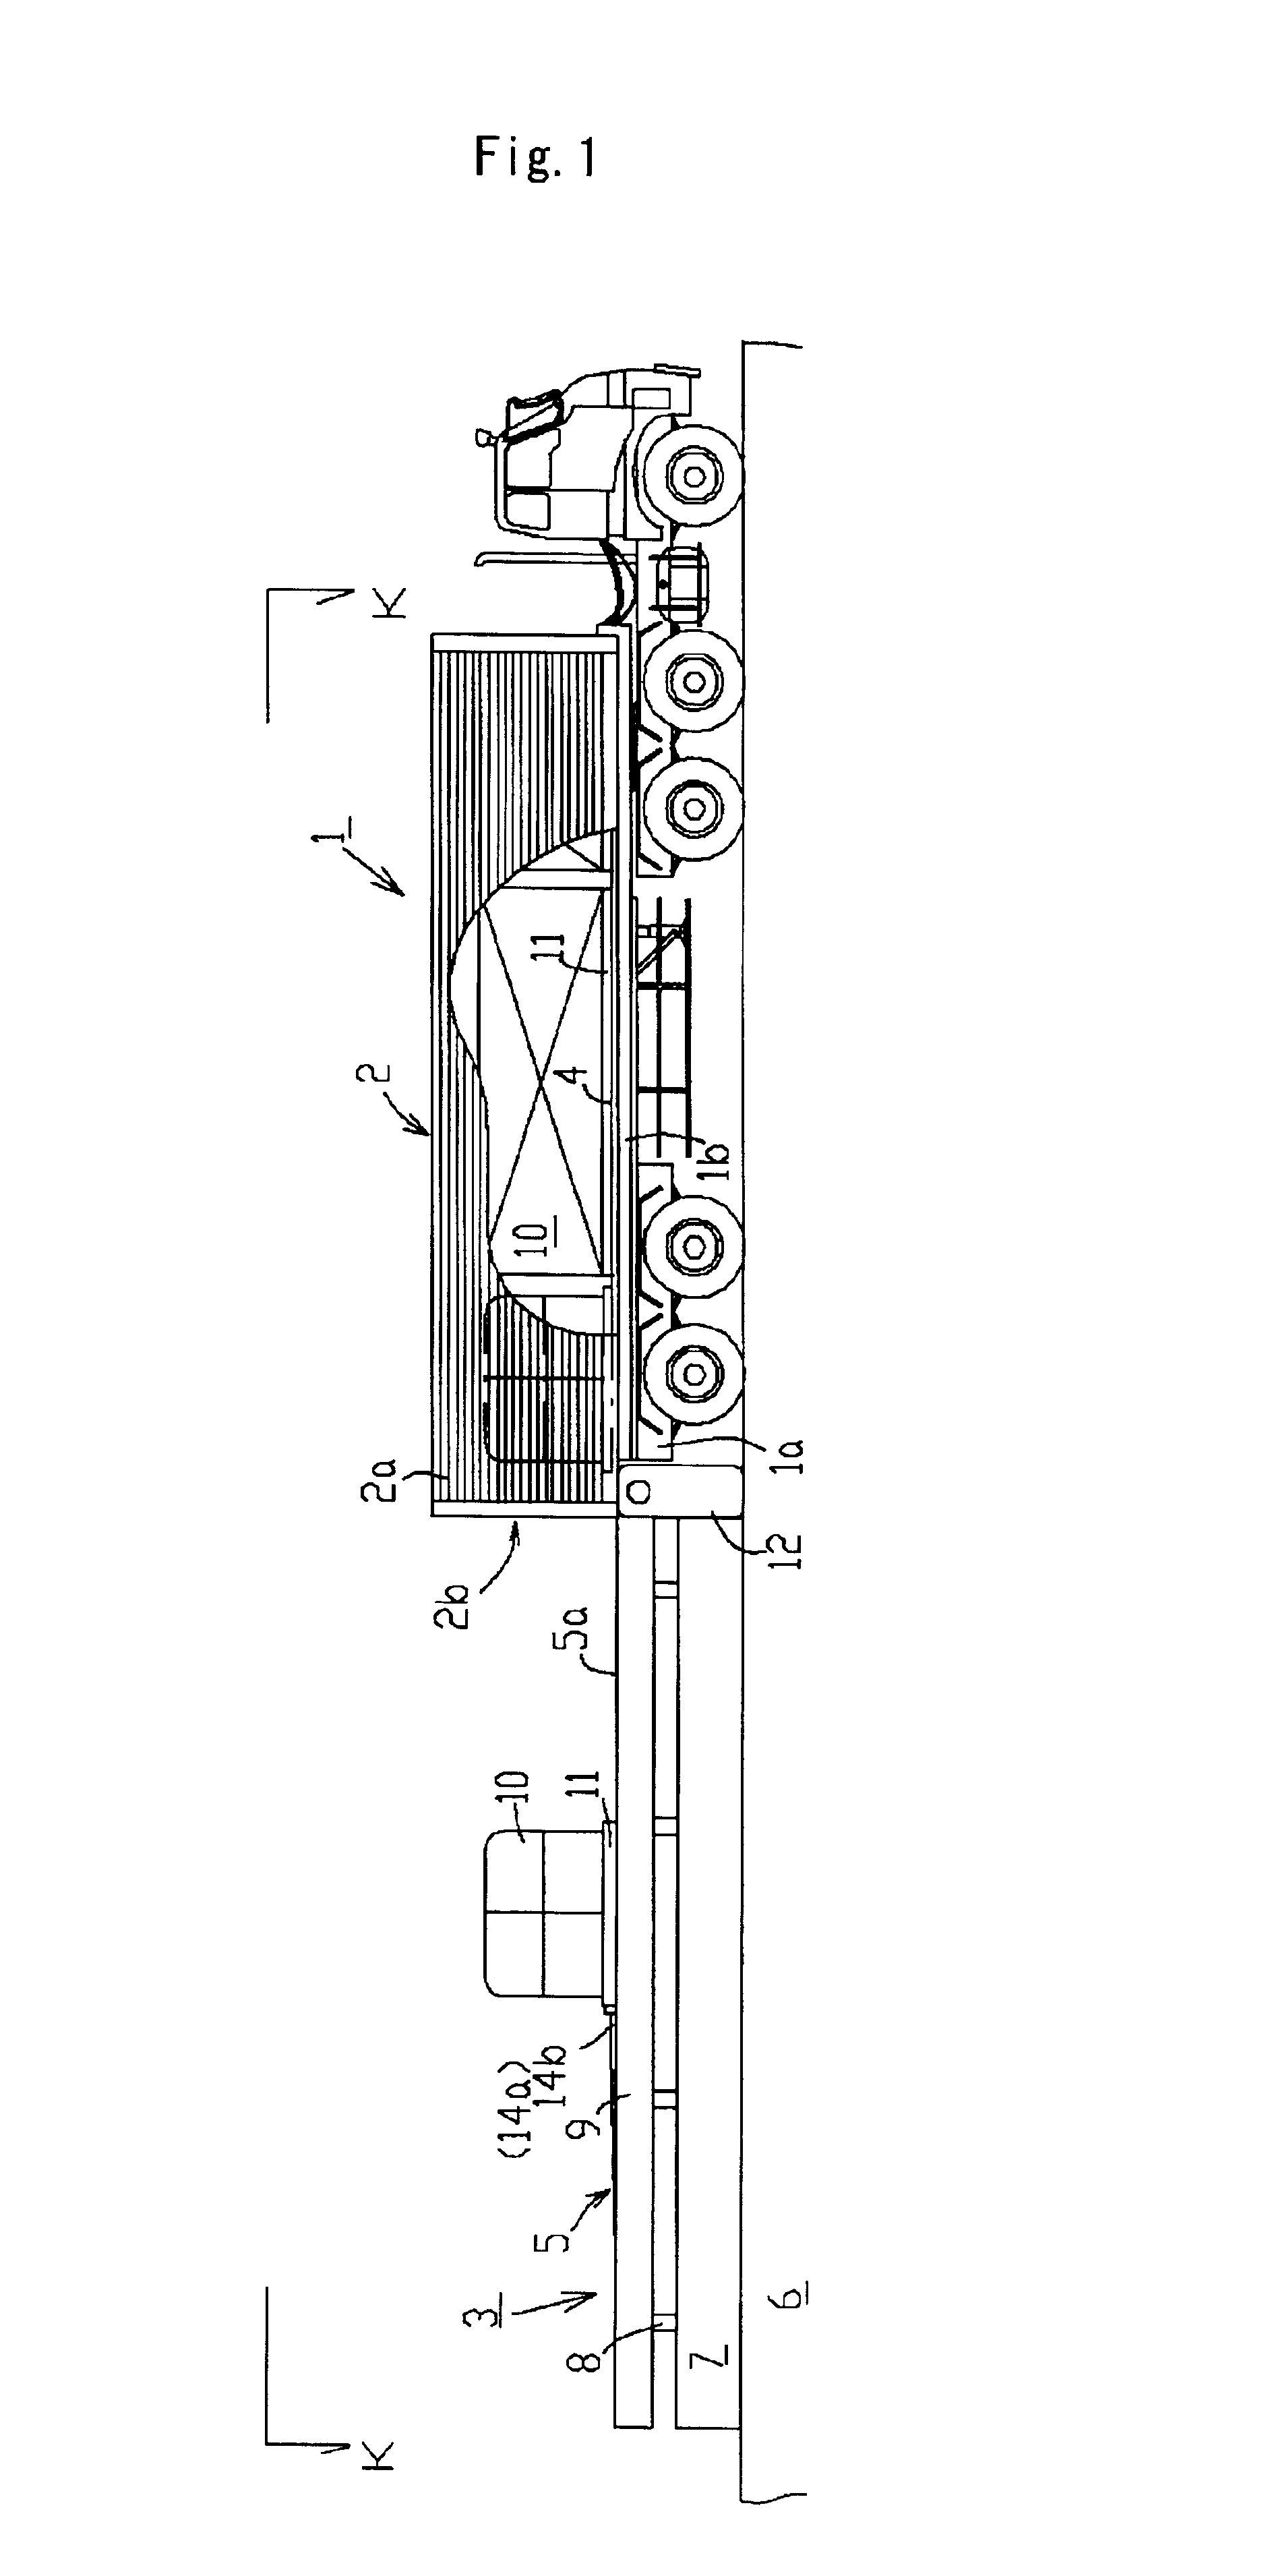 Device for carrying article into and from container, method for introducing and discharging article into and from container, and pallet for carrying article